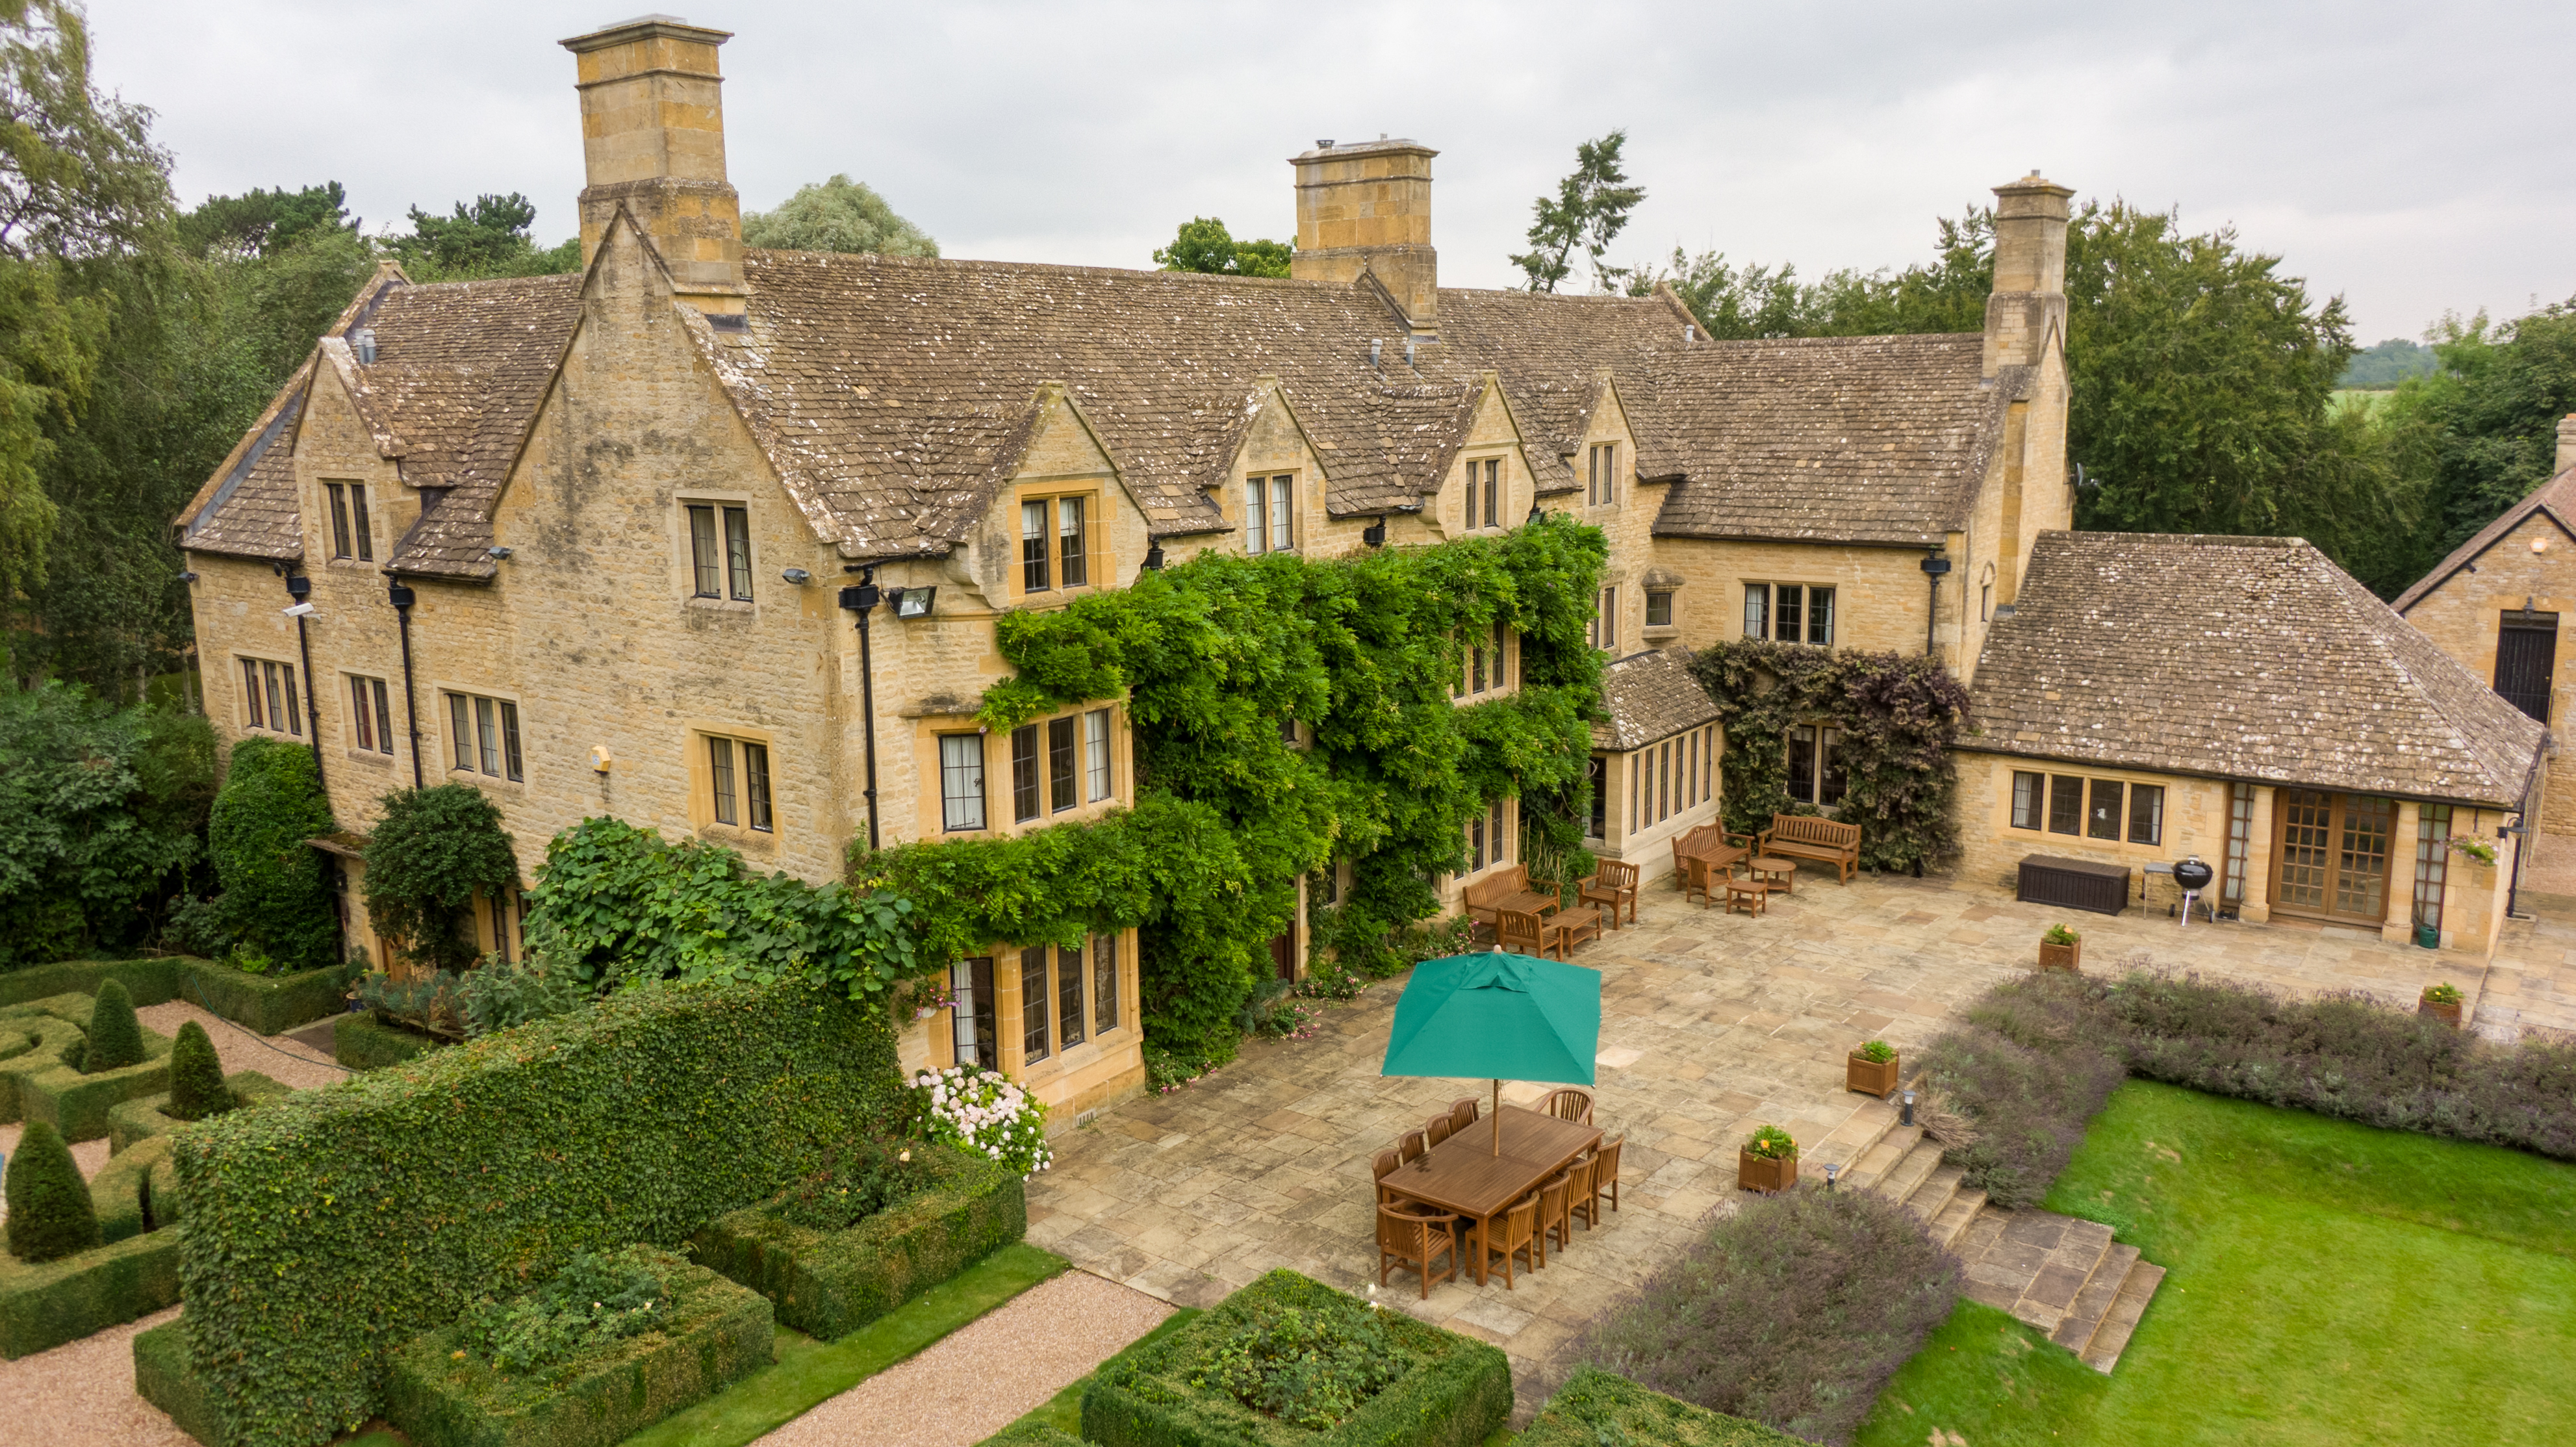 A week of luxury living for just £6: Be the first and only to book this Cotswolds private manor estate for the ultimate family reunion